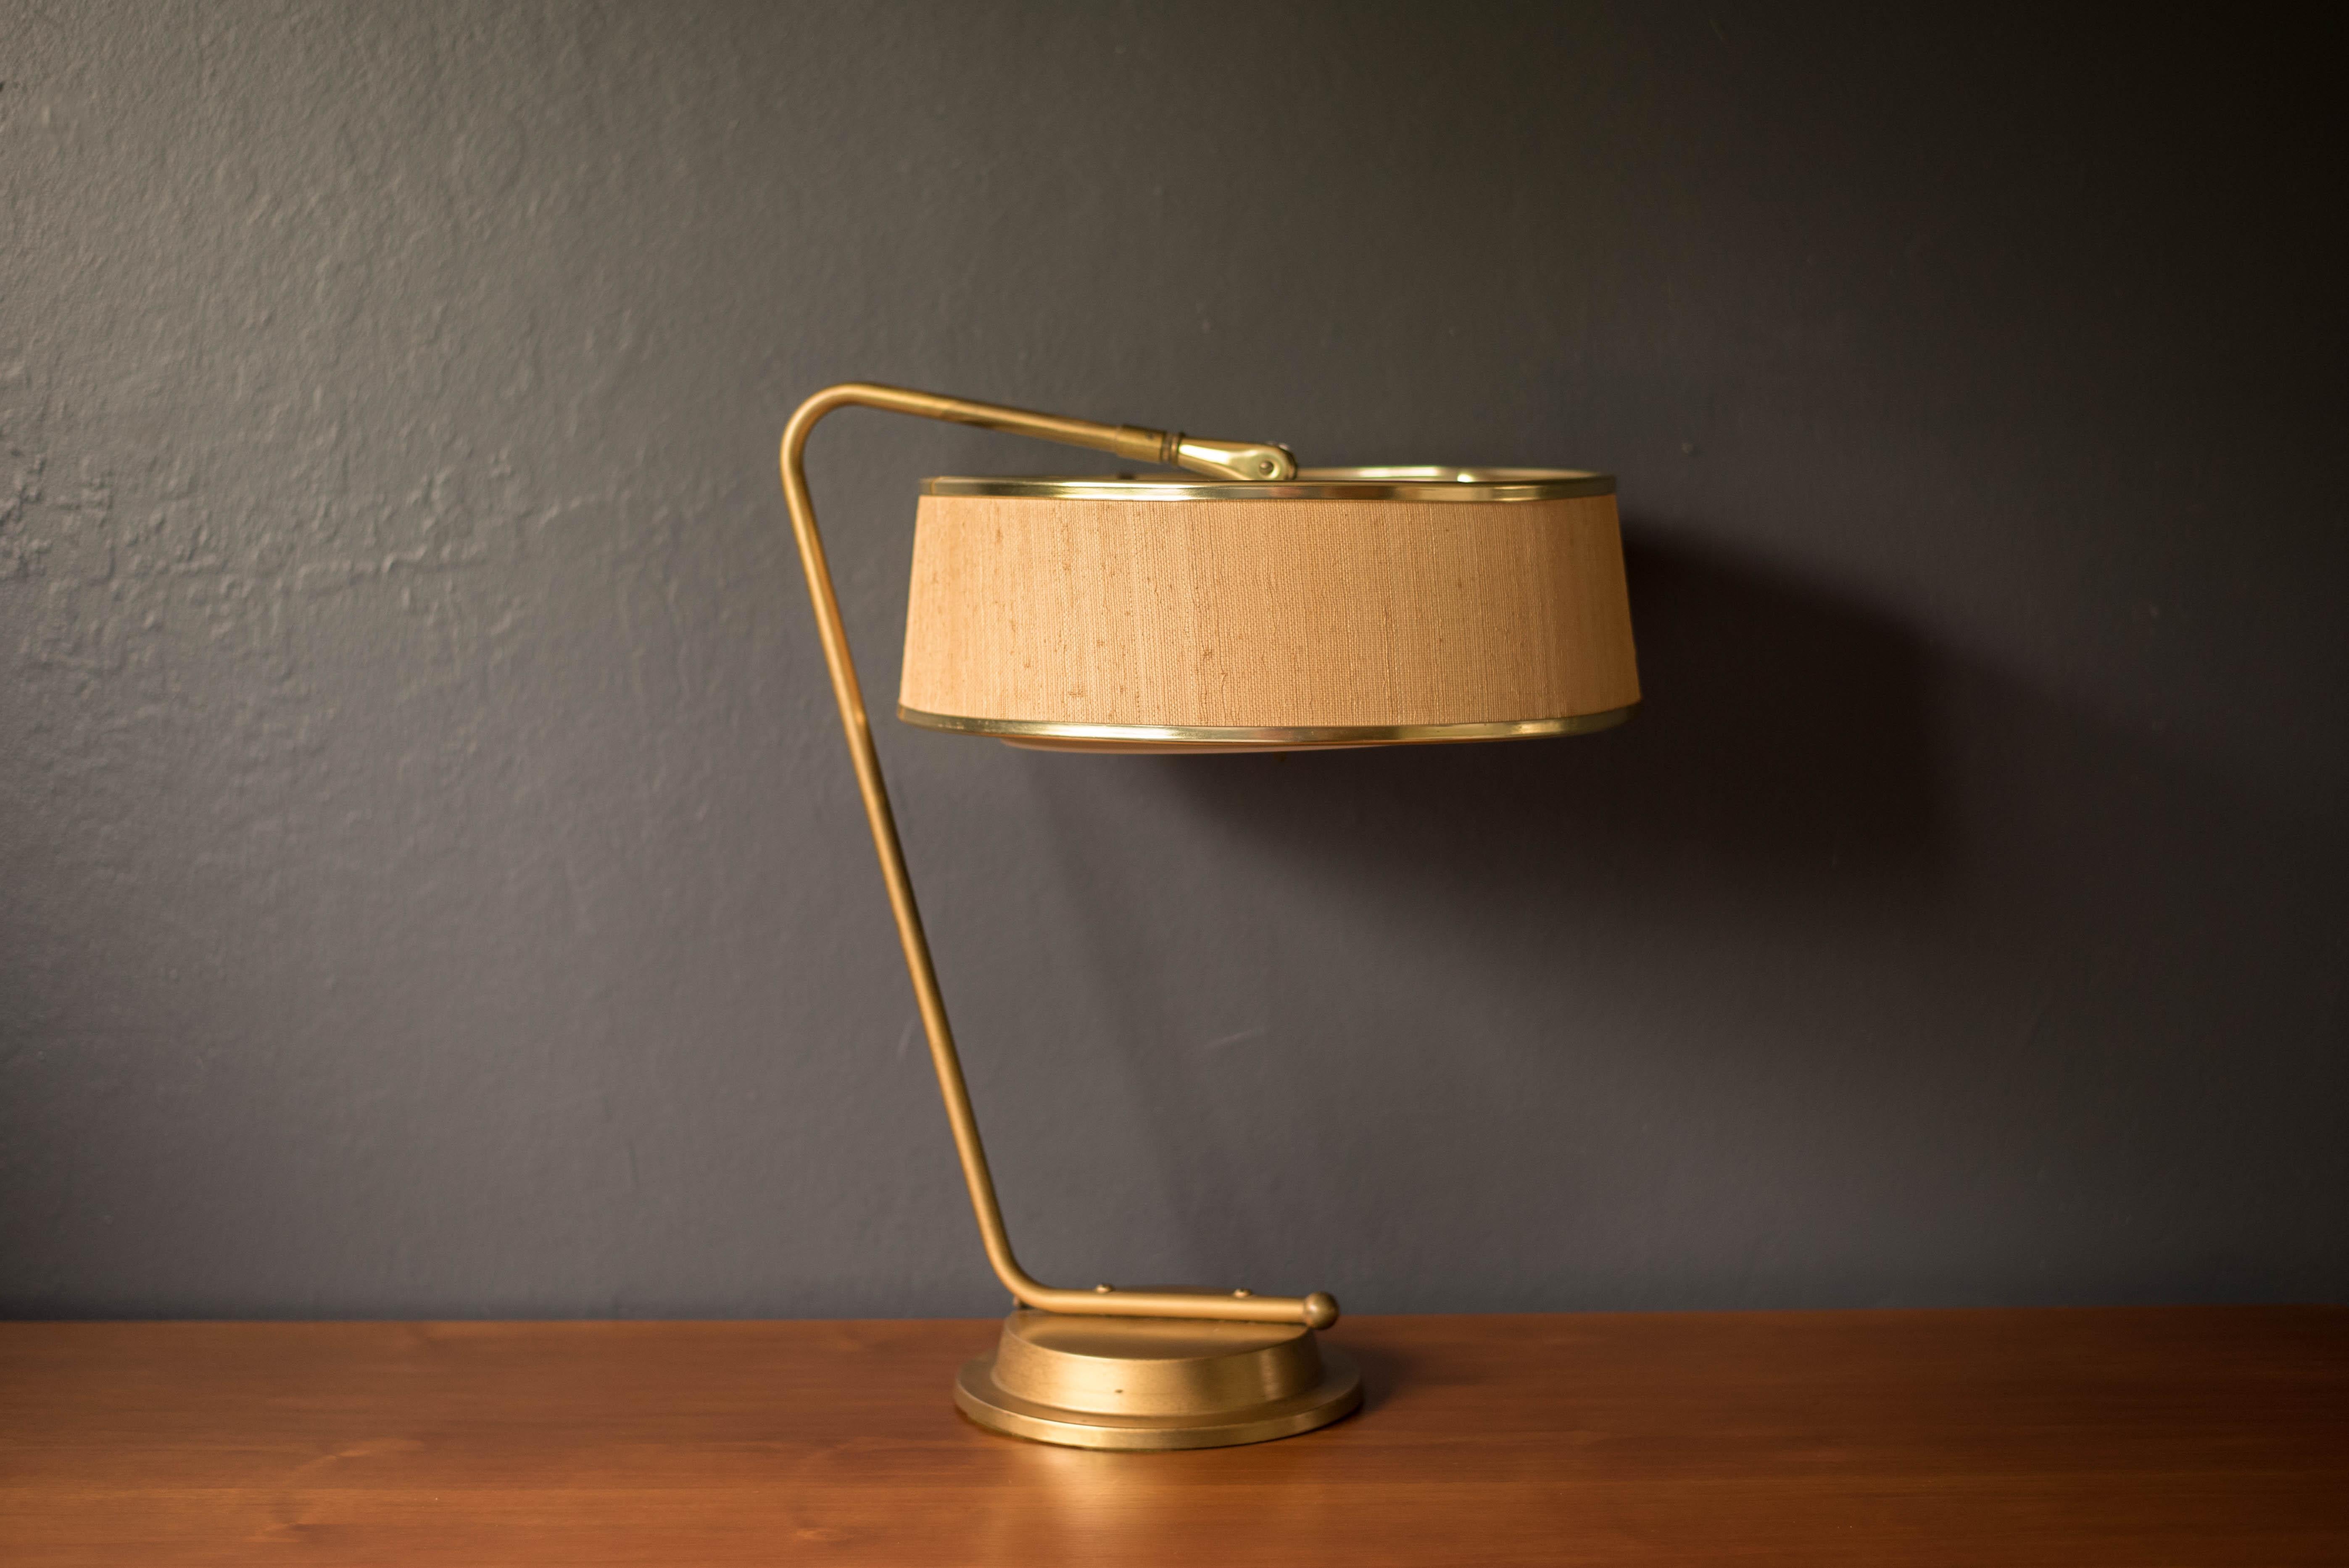 Vintage task table office lamp designed by Gerald Thurston for Lightolier, circa 1960s. This unique piece includes the original grasscloth drum shade and perforated metal diffuser adjustable top. Complete with a weighted base finished in brass that